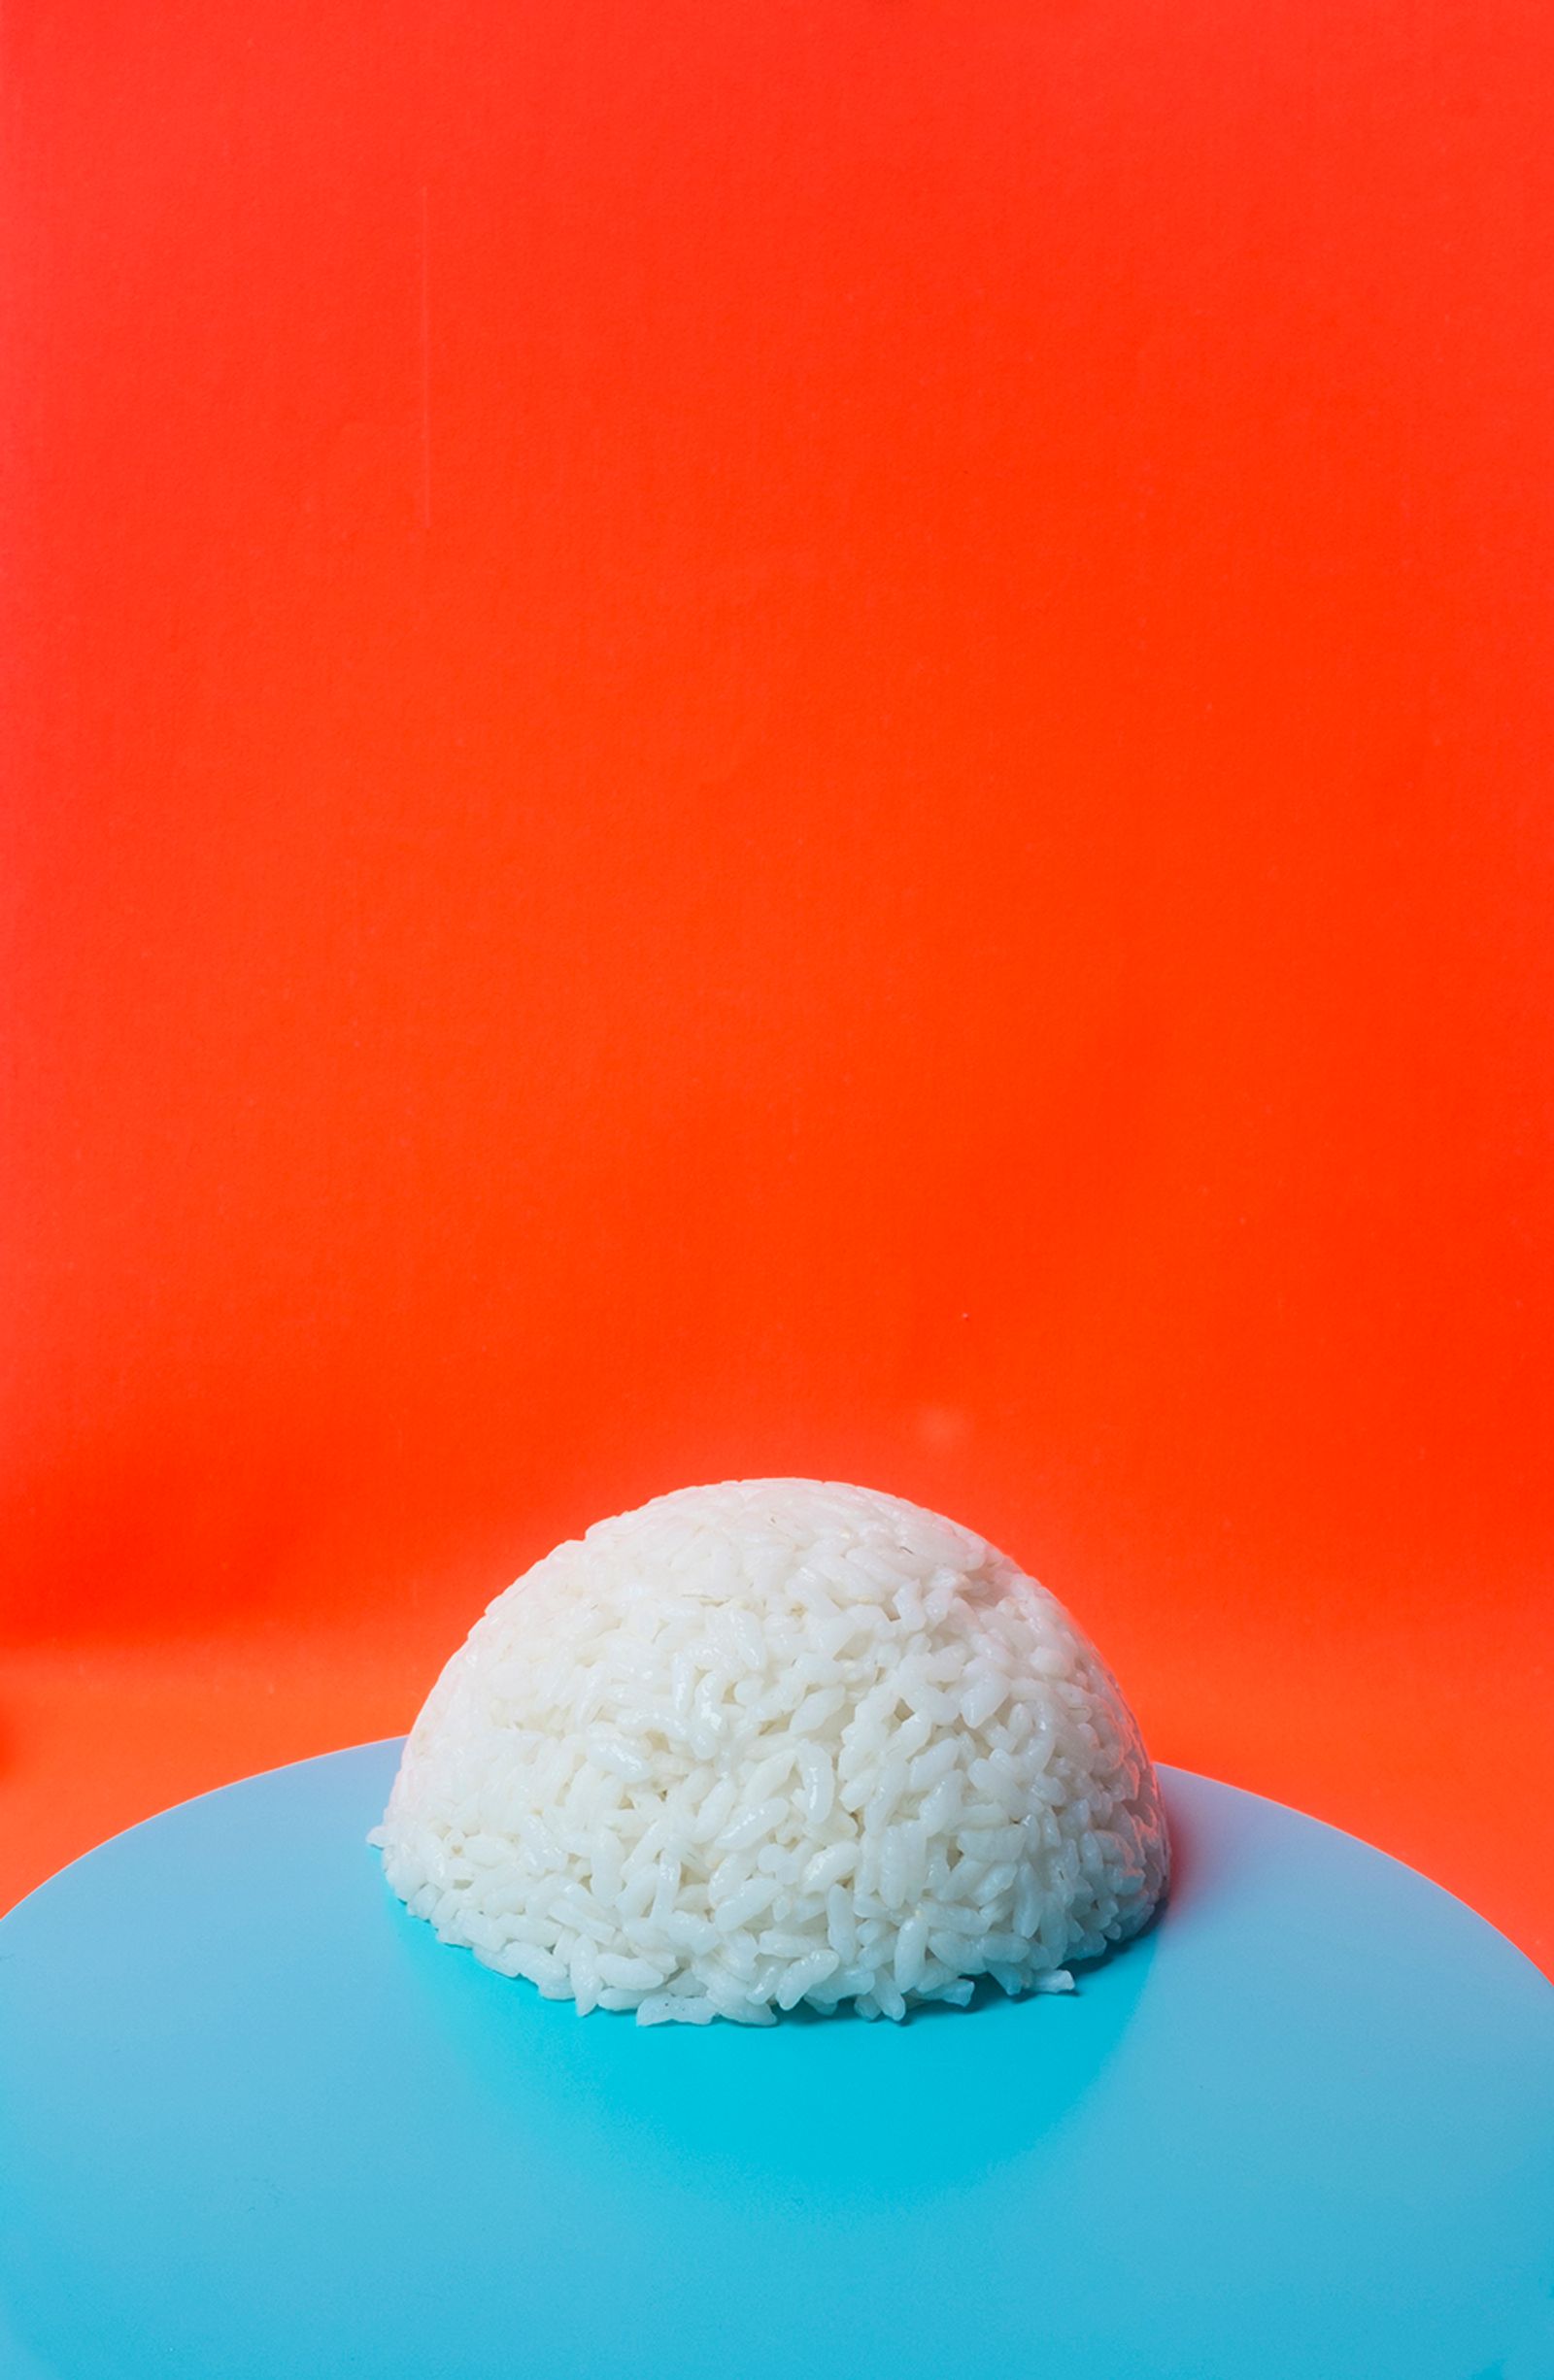 © Barbara Modolo - Image from the Toxo menu photography project